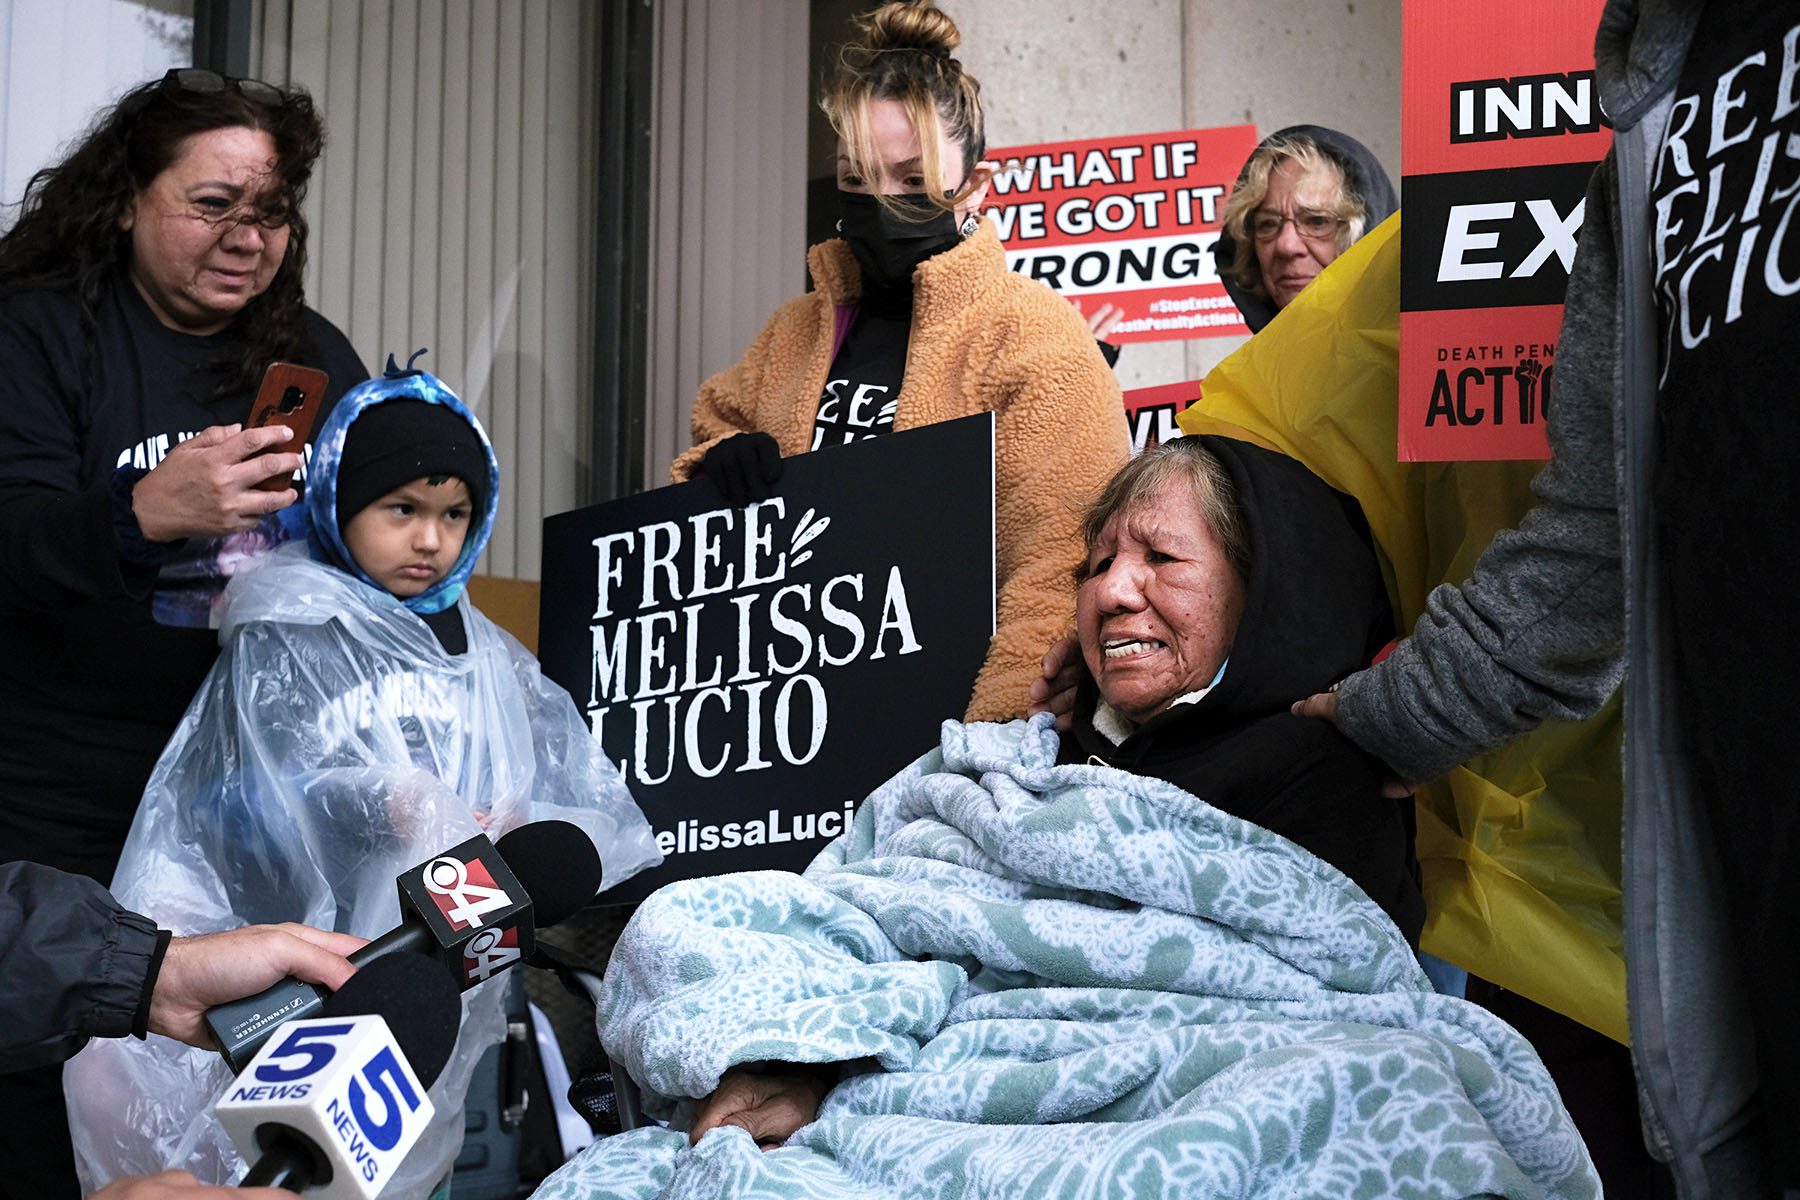 Esperanza Treviño, surrounded by family and friends holding signs that read "free melissa lucio"